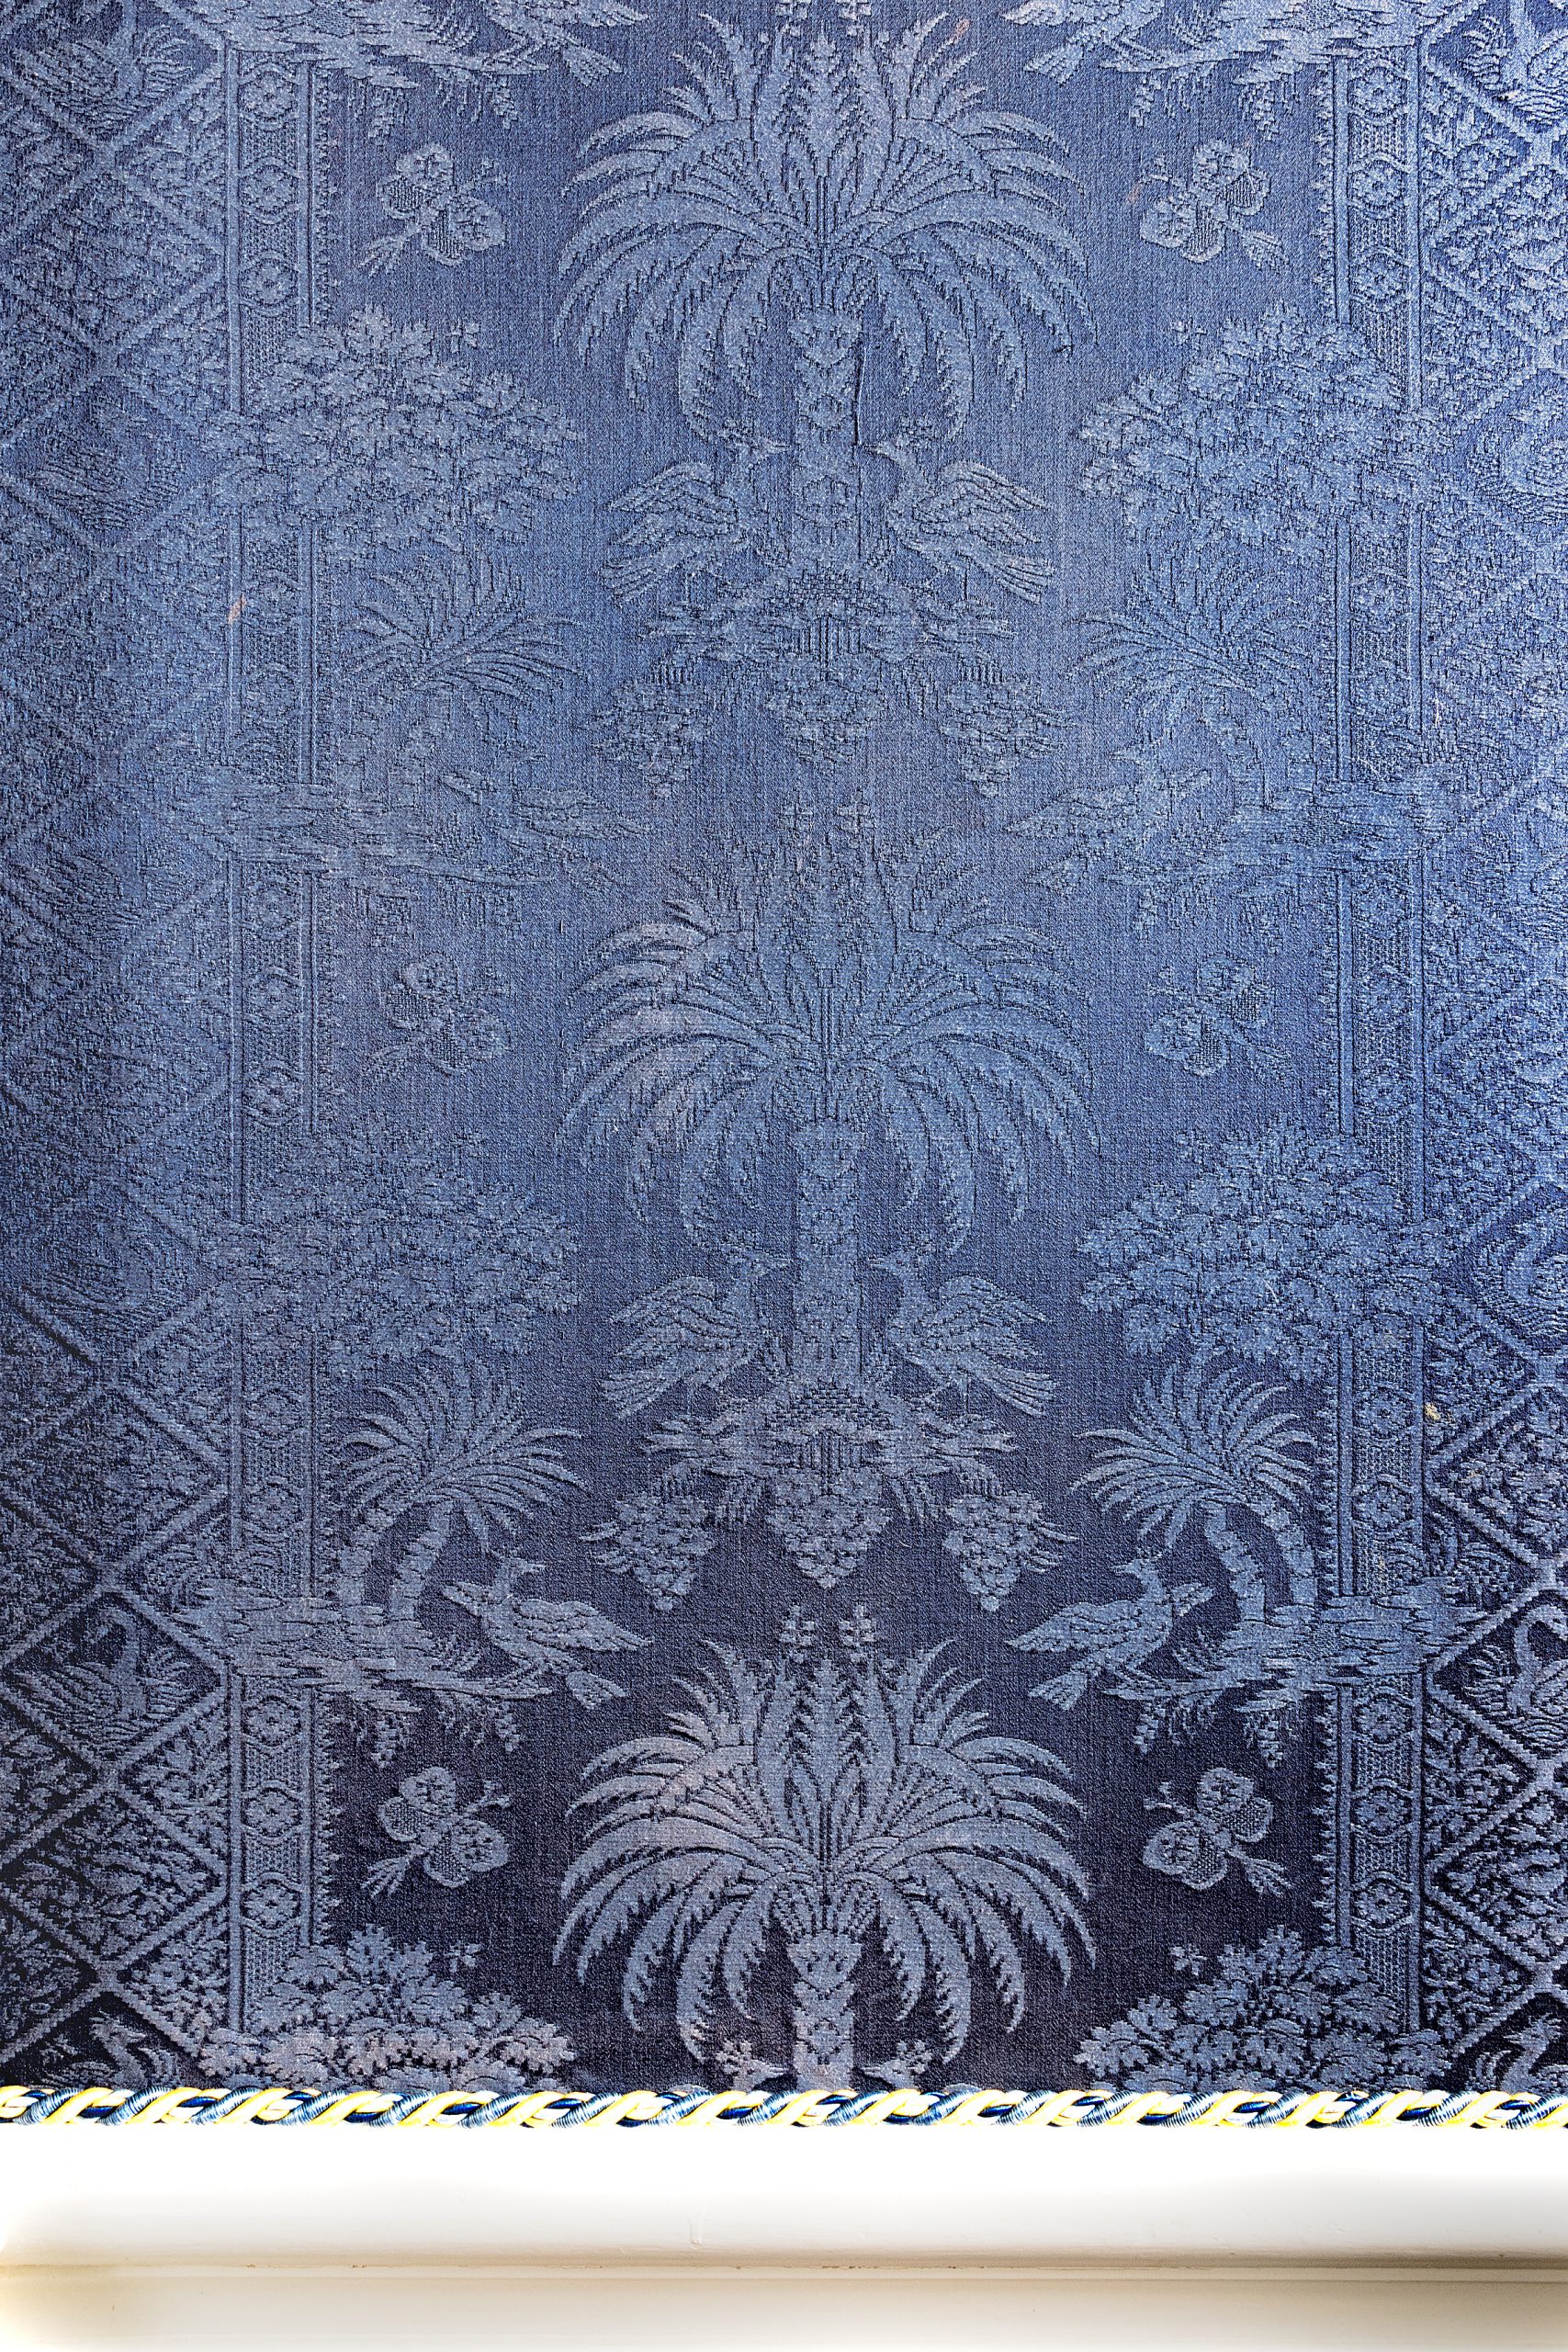  The State Dining Room walls are covered in fabric patterned with subtle palmetto trees, custom dyed a deep blue to match the state flag. 